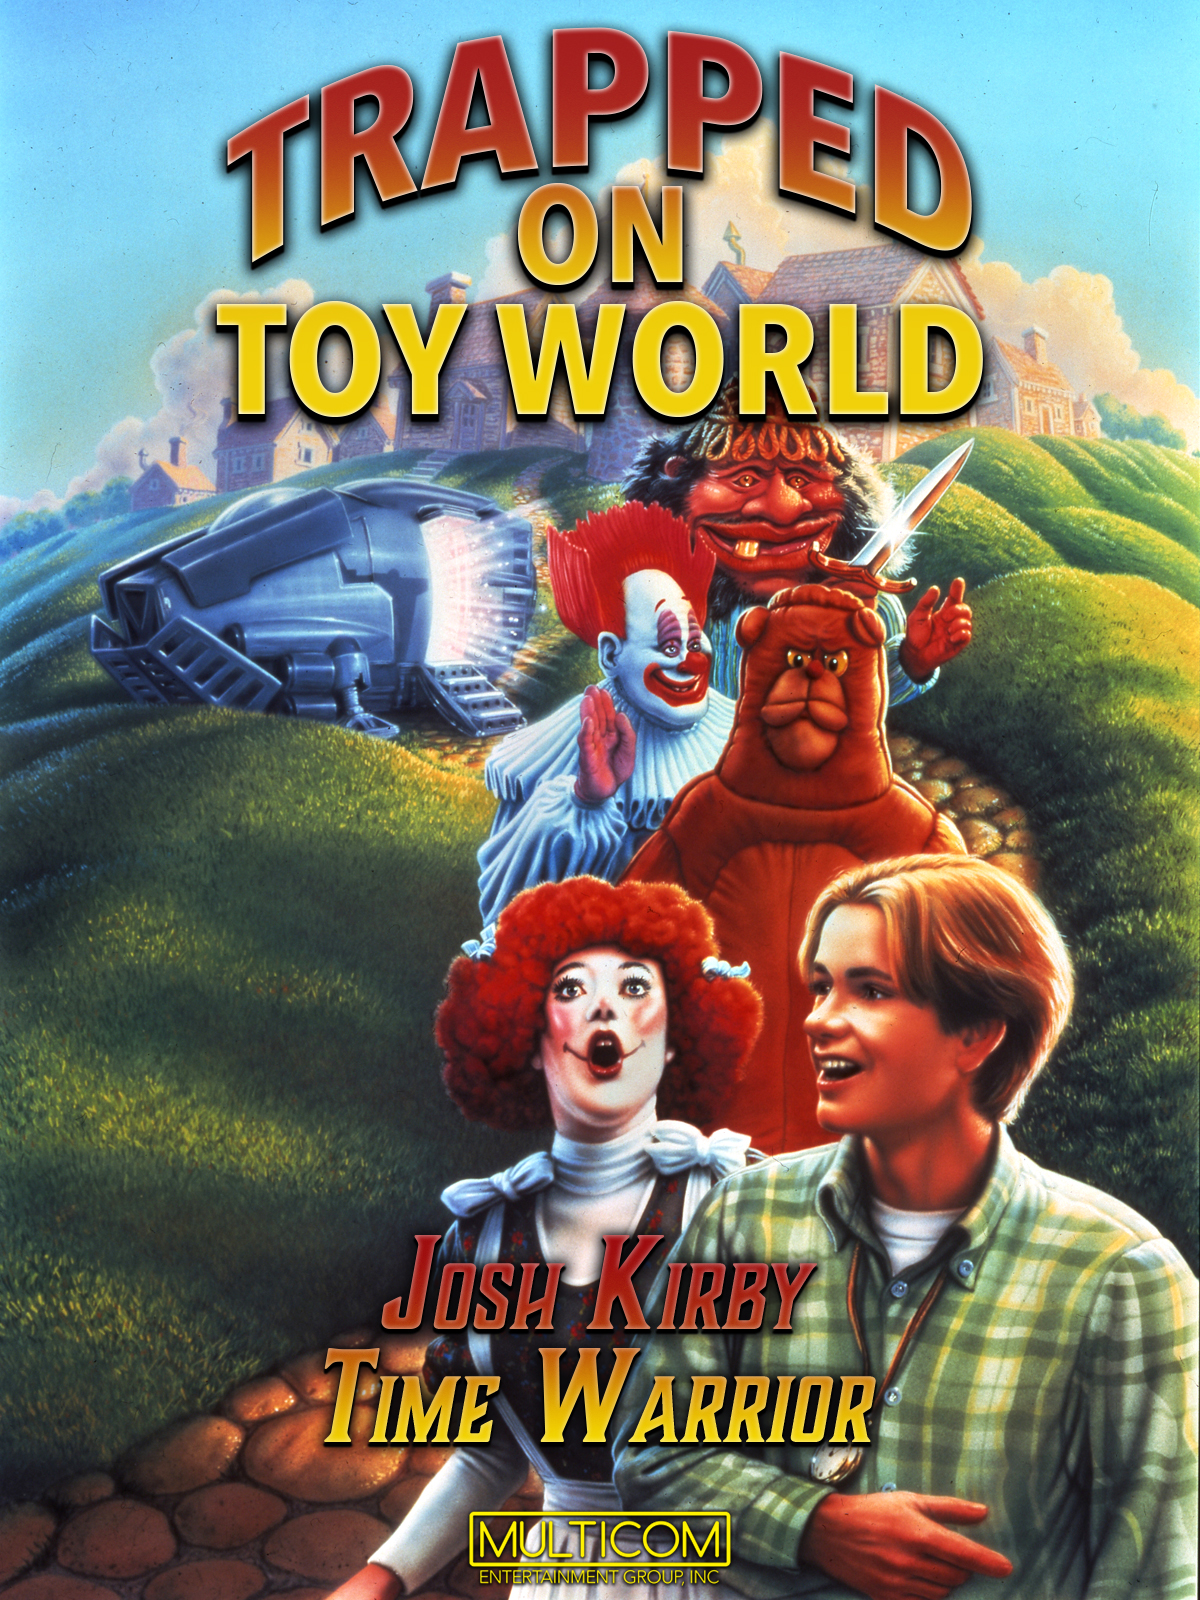 Josh Kirby: Time Warrior! Chap. 3: Trapped on Toyworld